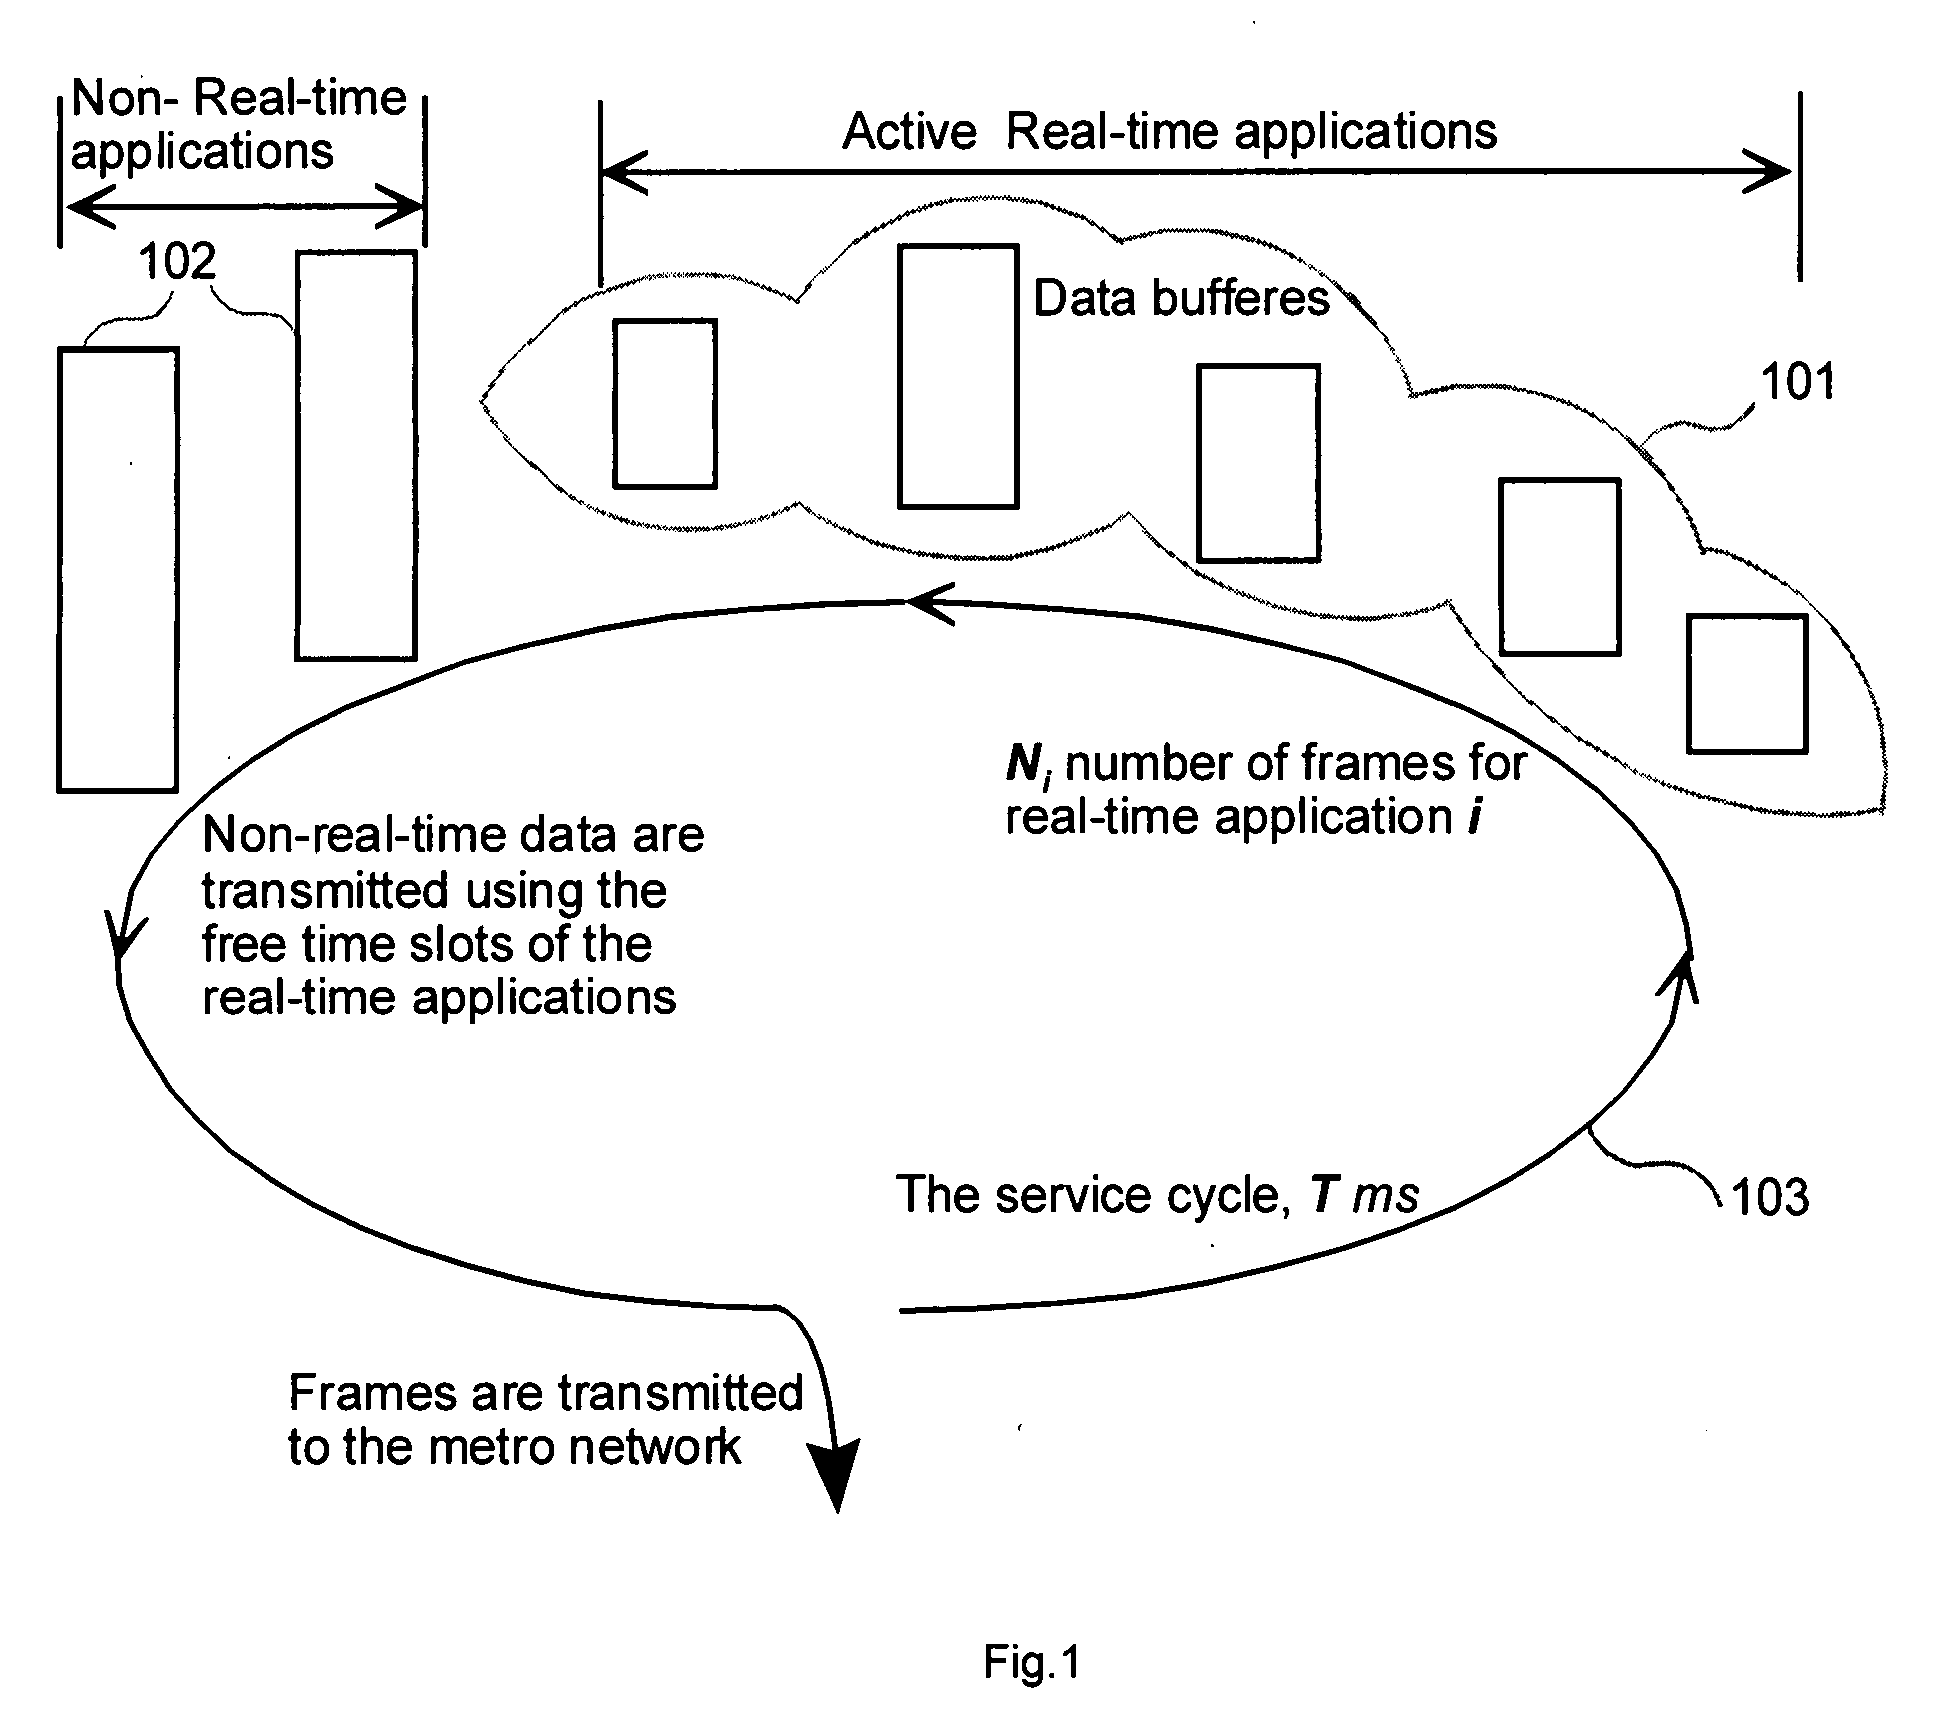 Residential gateway for ethernet based metro networks and a global hierarchical ethernet addressing system